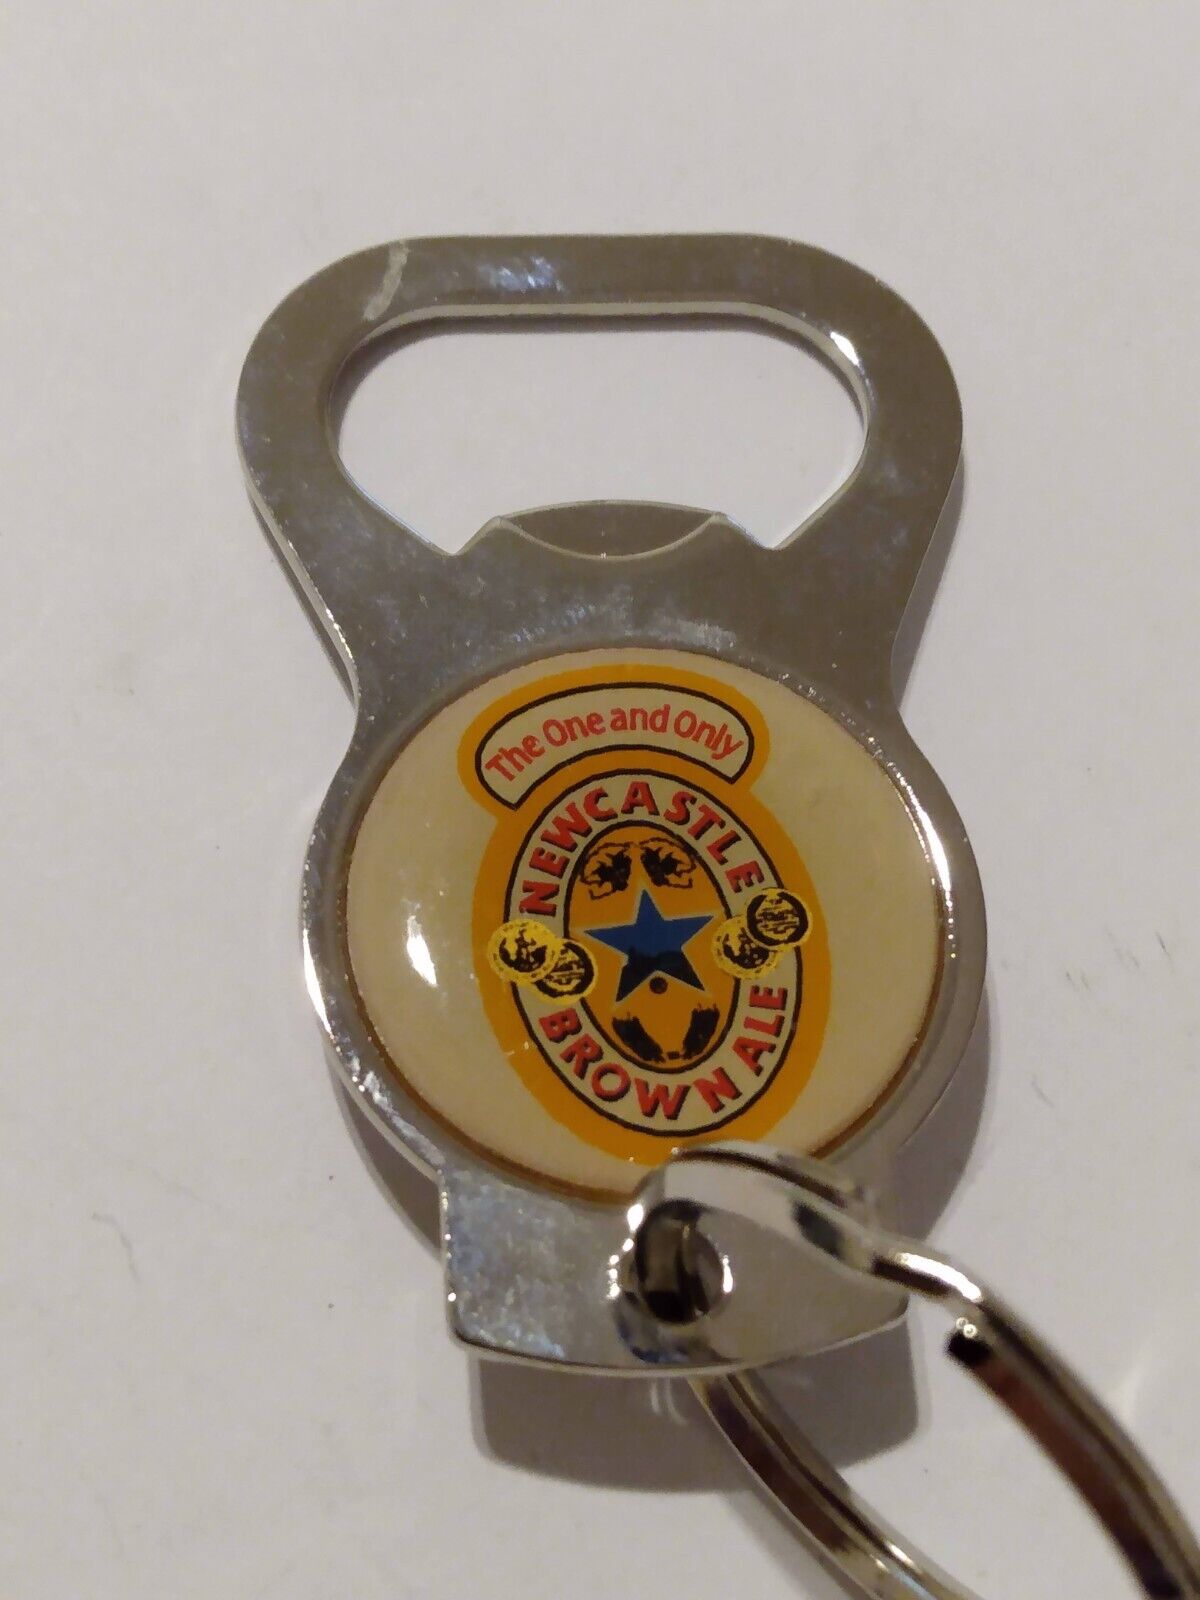 Newcastle The One And Only Brown Ale Bottle Opener Keyring Accessory